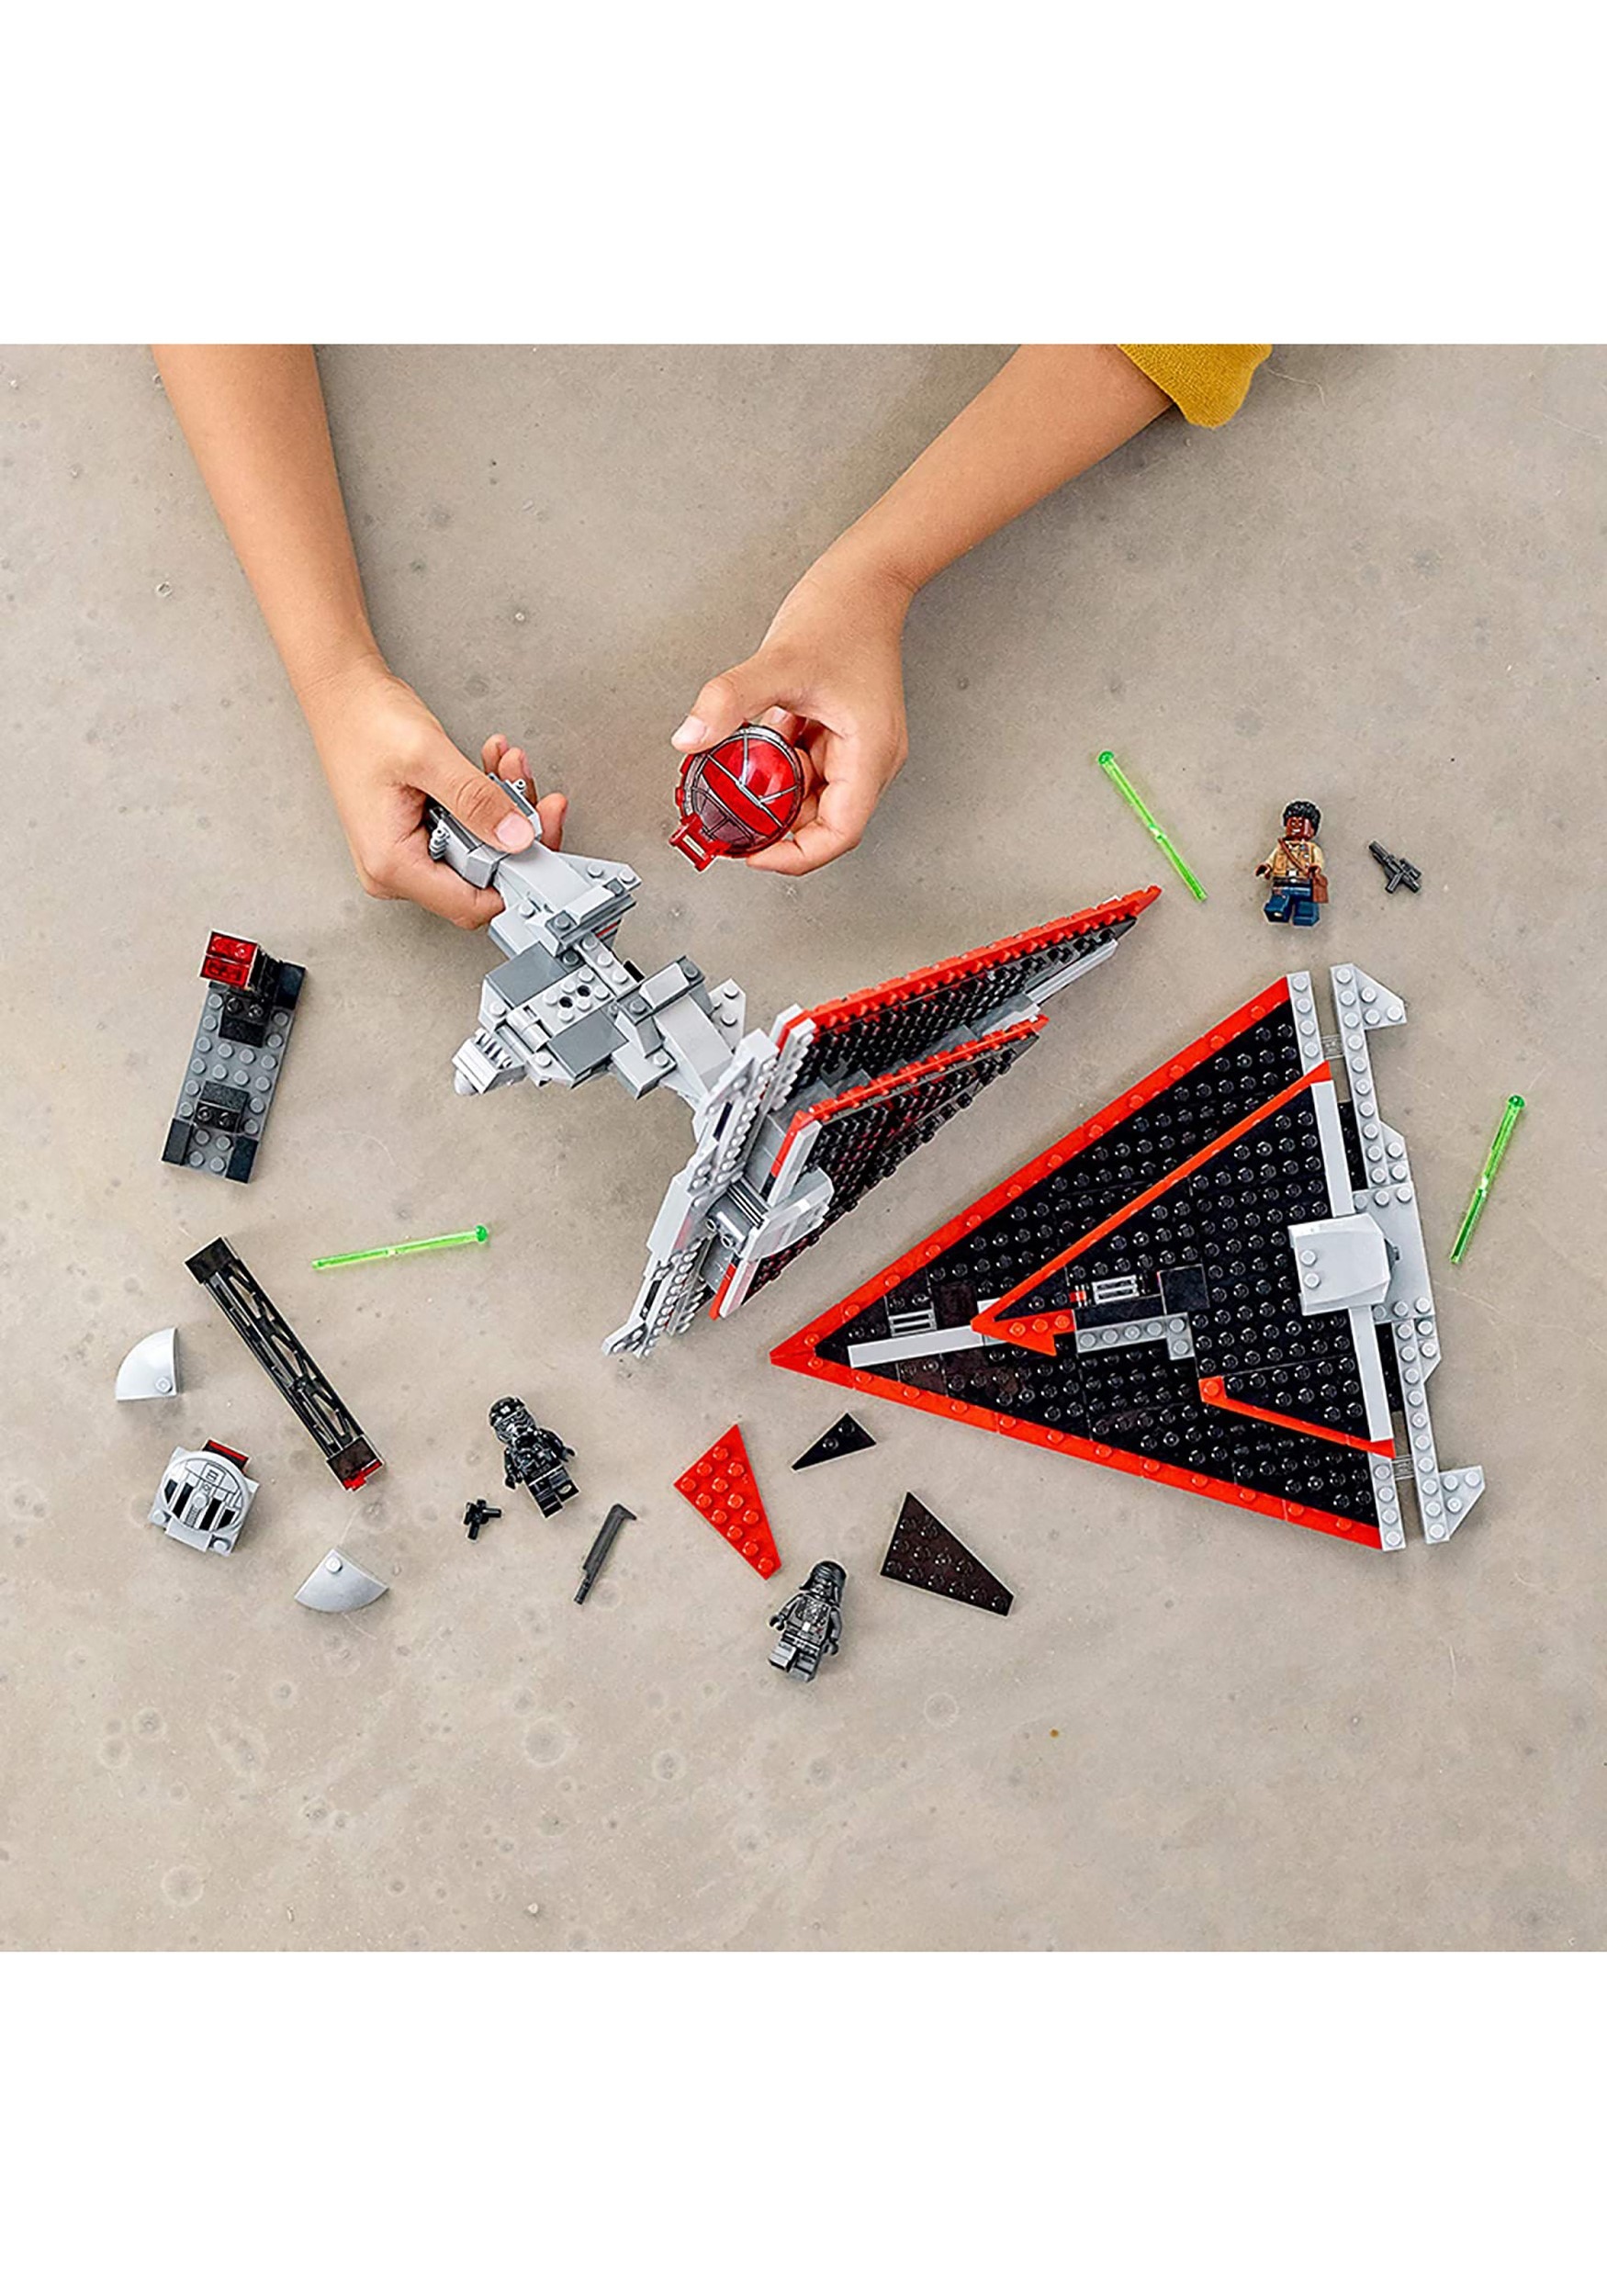 lego fighter